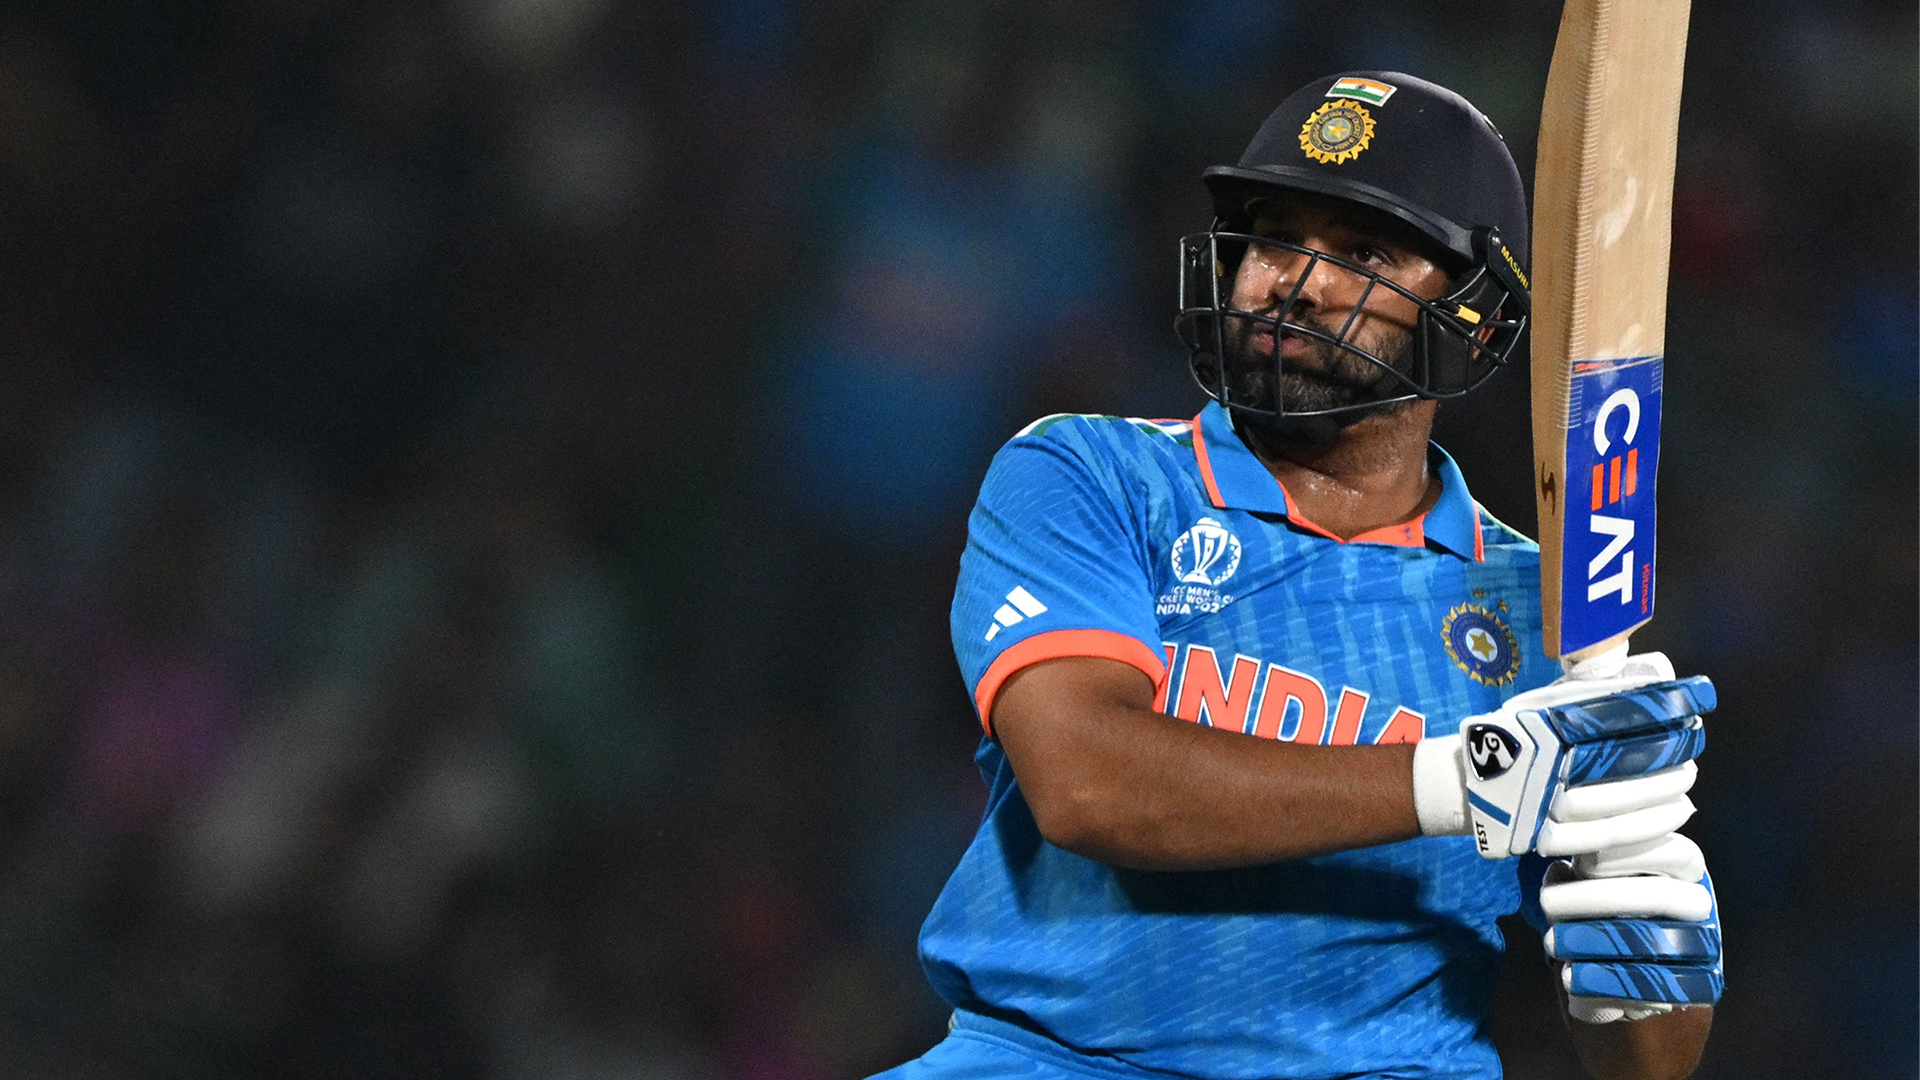 Rohit Sharma's Potential Return as Captain Sparks Enthusiasm for Upcoming T20 World Cup